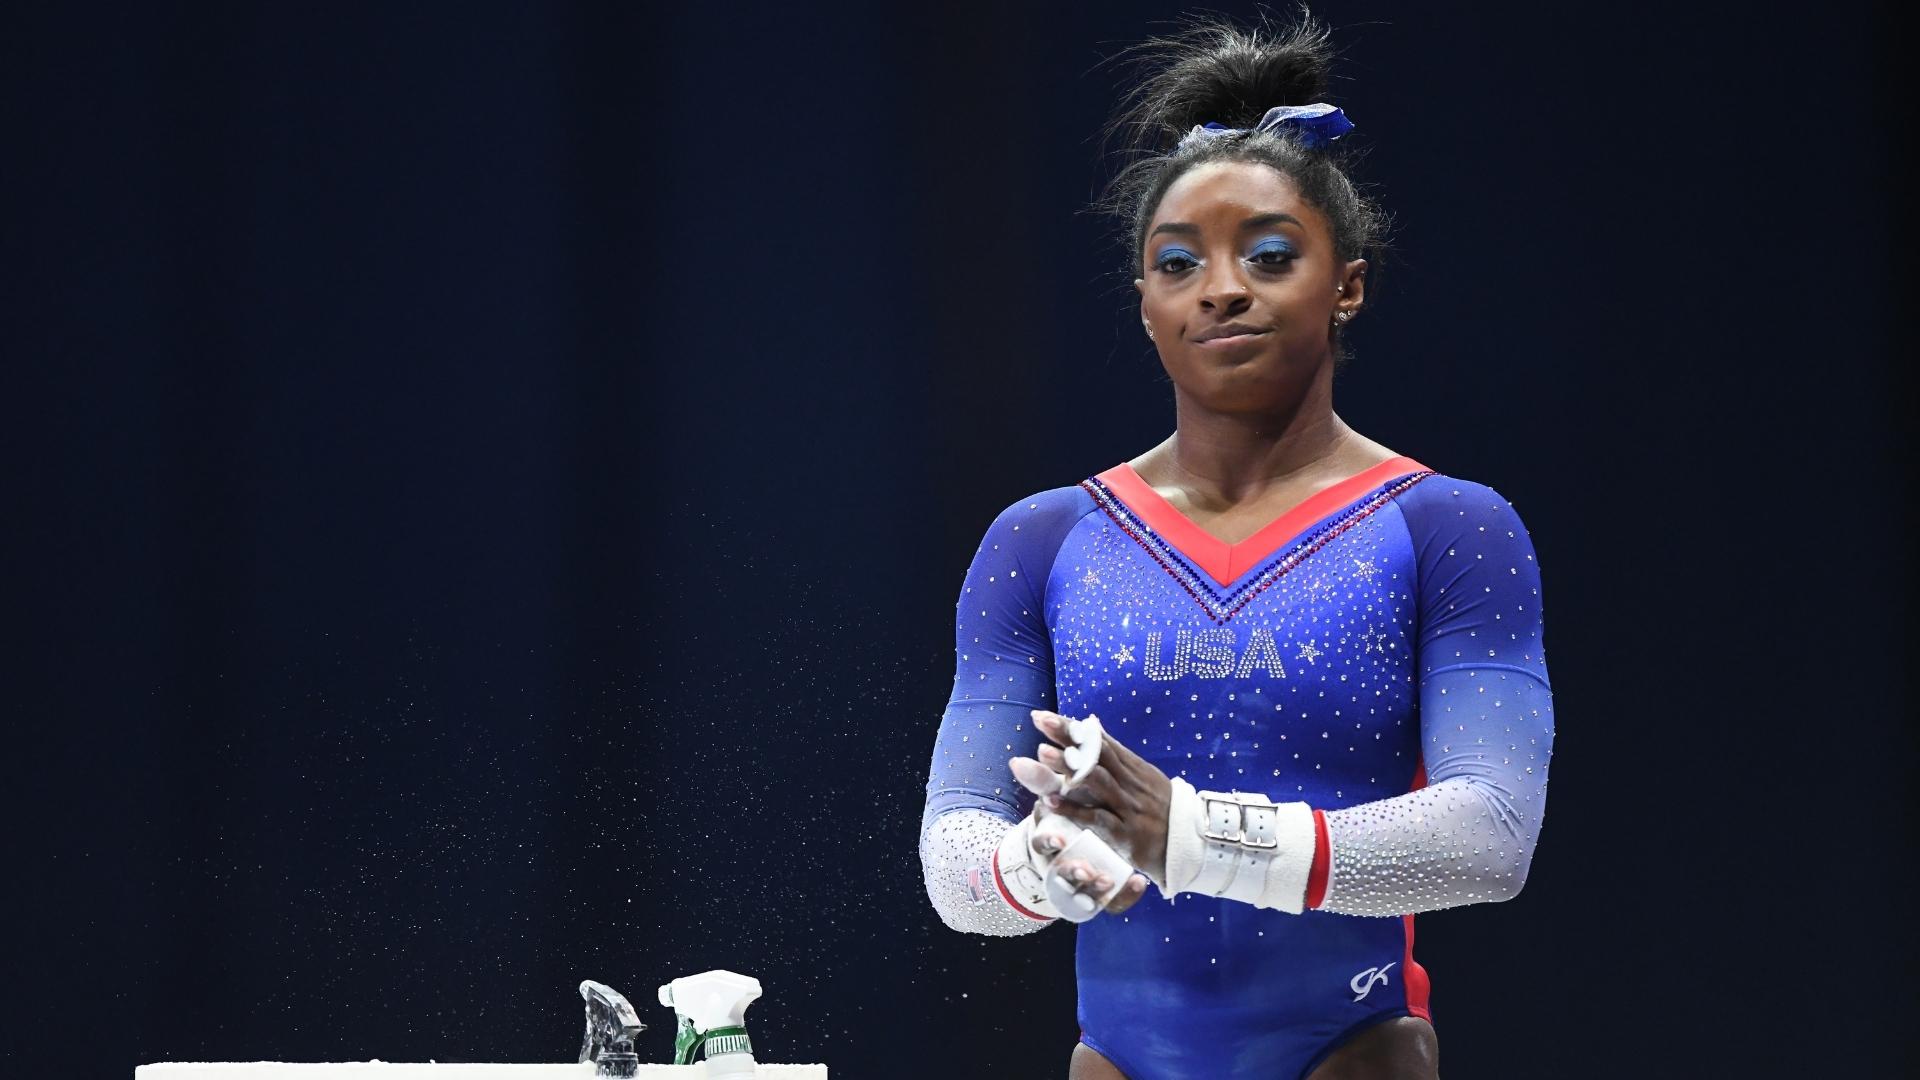 Simone Biles confirms she's not retired, just working on her mental health